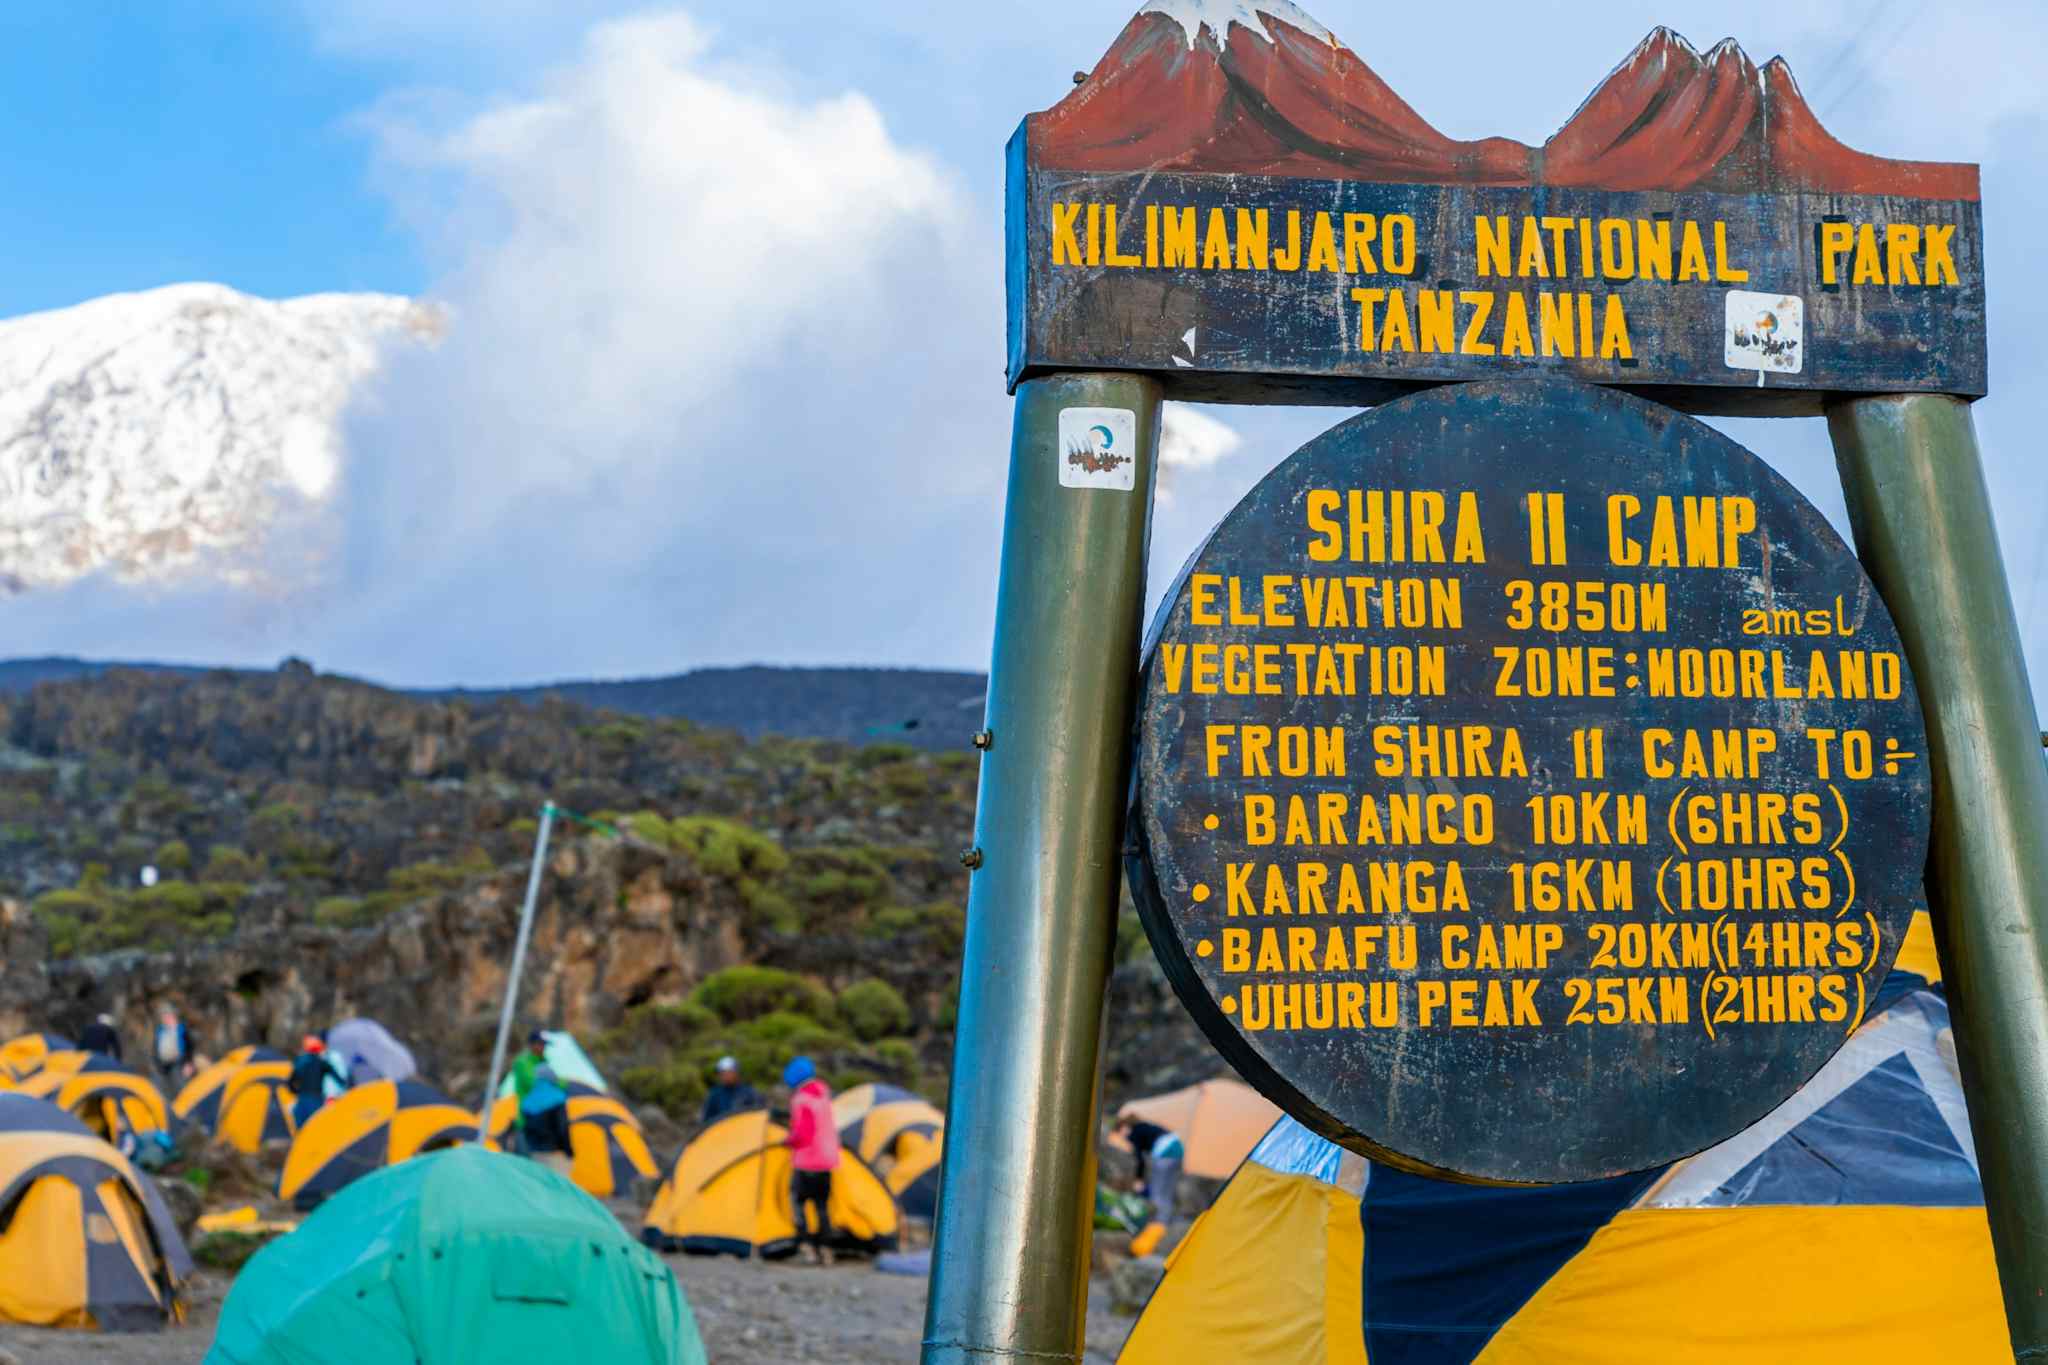 The signpost for Shira Camp II, with tents and Mount Kilimanjaro's summit in the background.